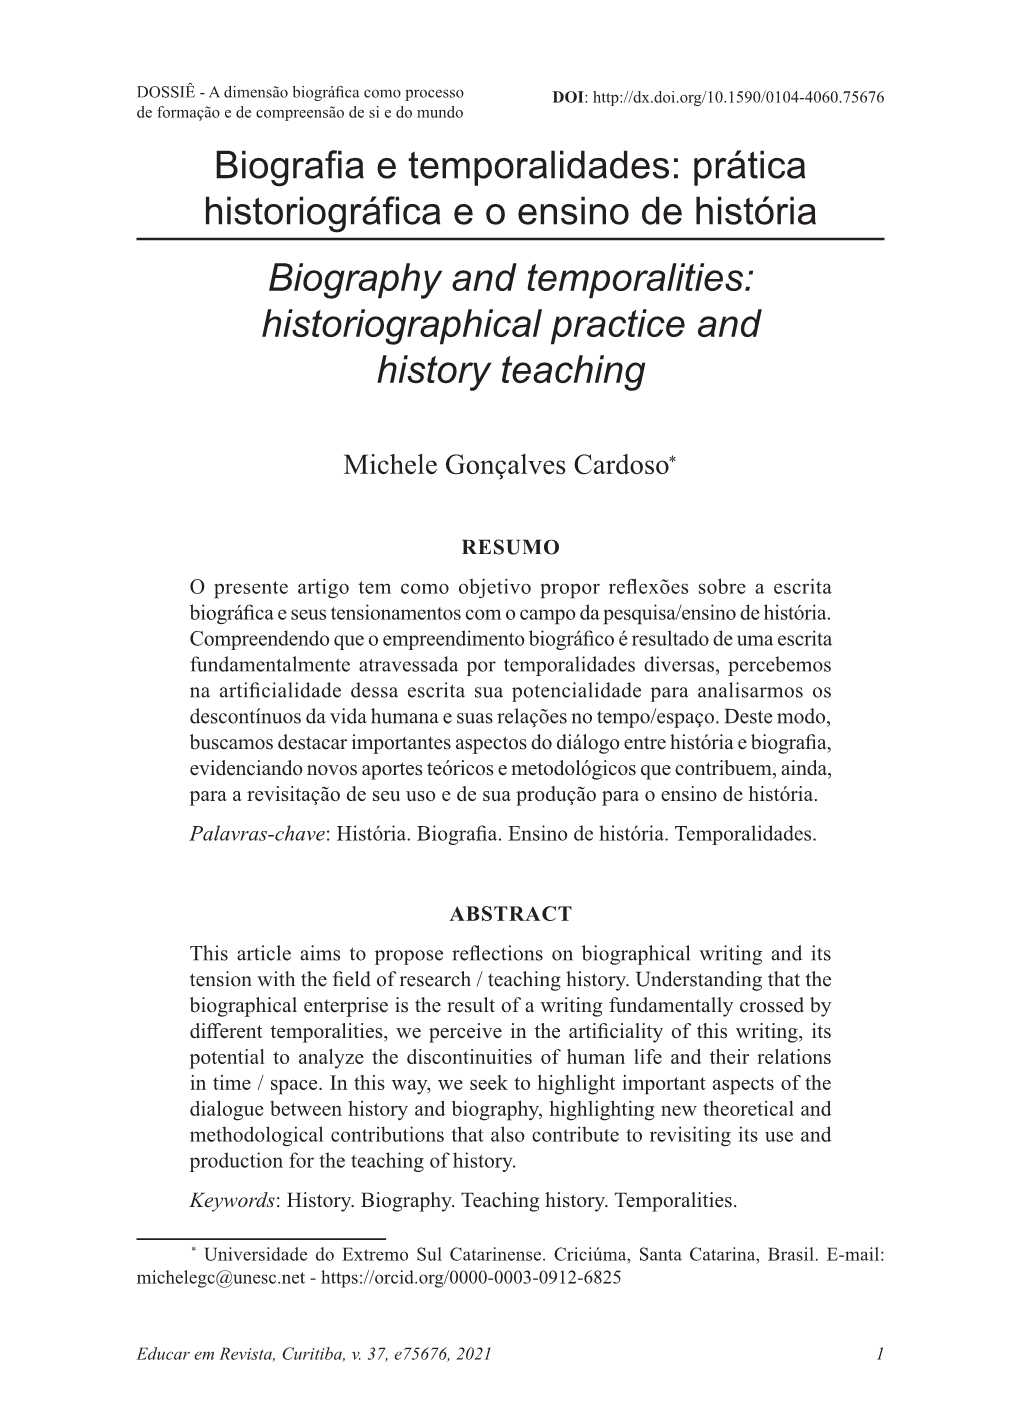 Biography and Temporalities: Historiographical Practice and History Teaching